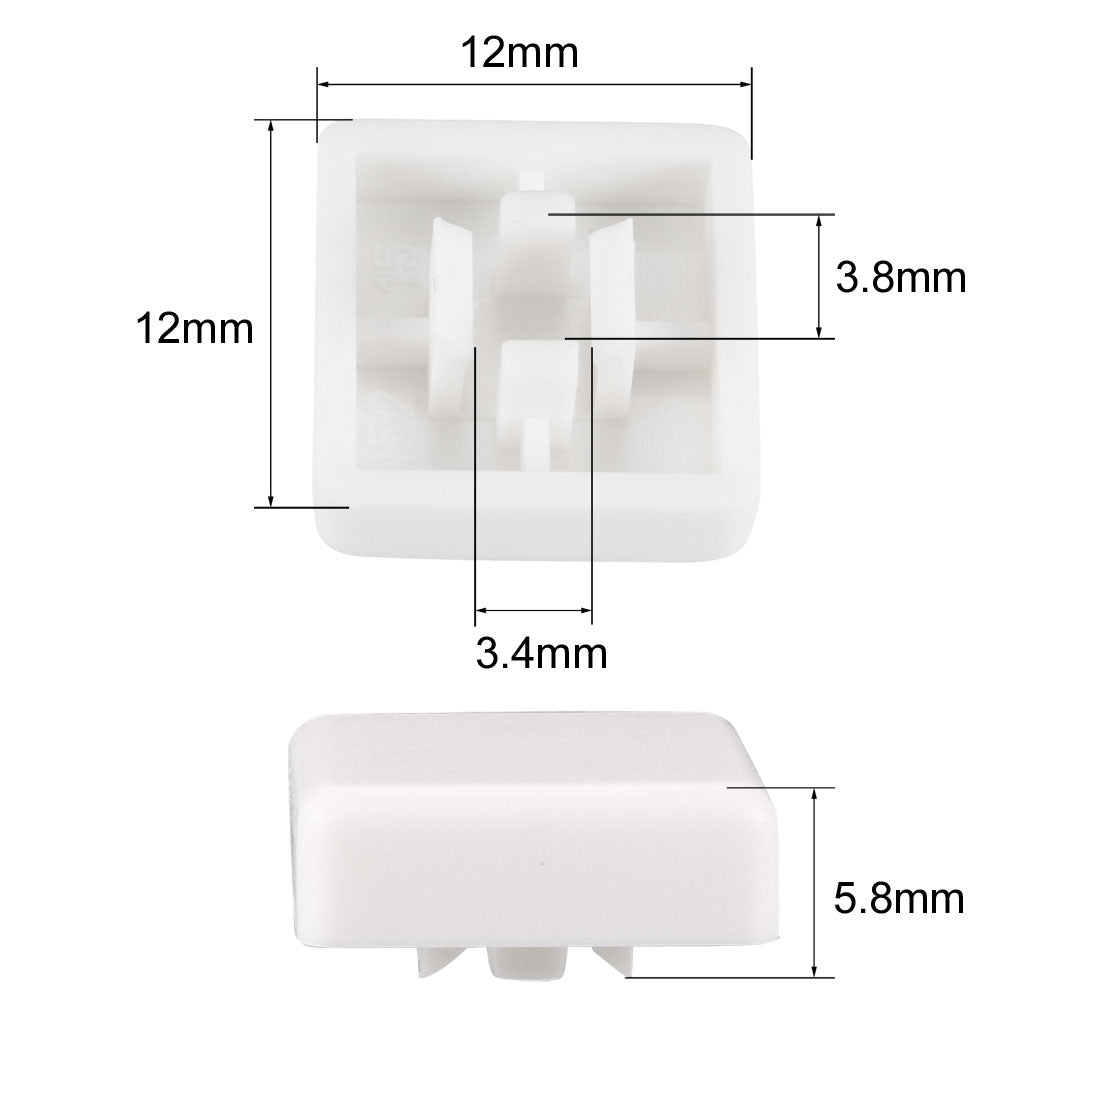 uxcell Uxcell 20Pcs Plastic 12x12mm Pushbutton Tactile Switch Caps Cover Keycaps White for 12x12x7.3mm Tact Switch